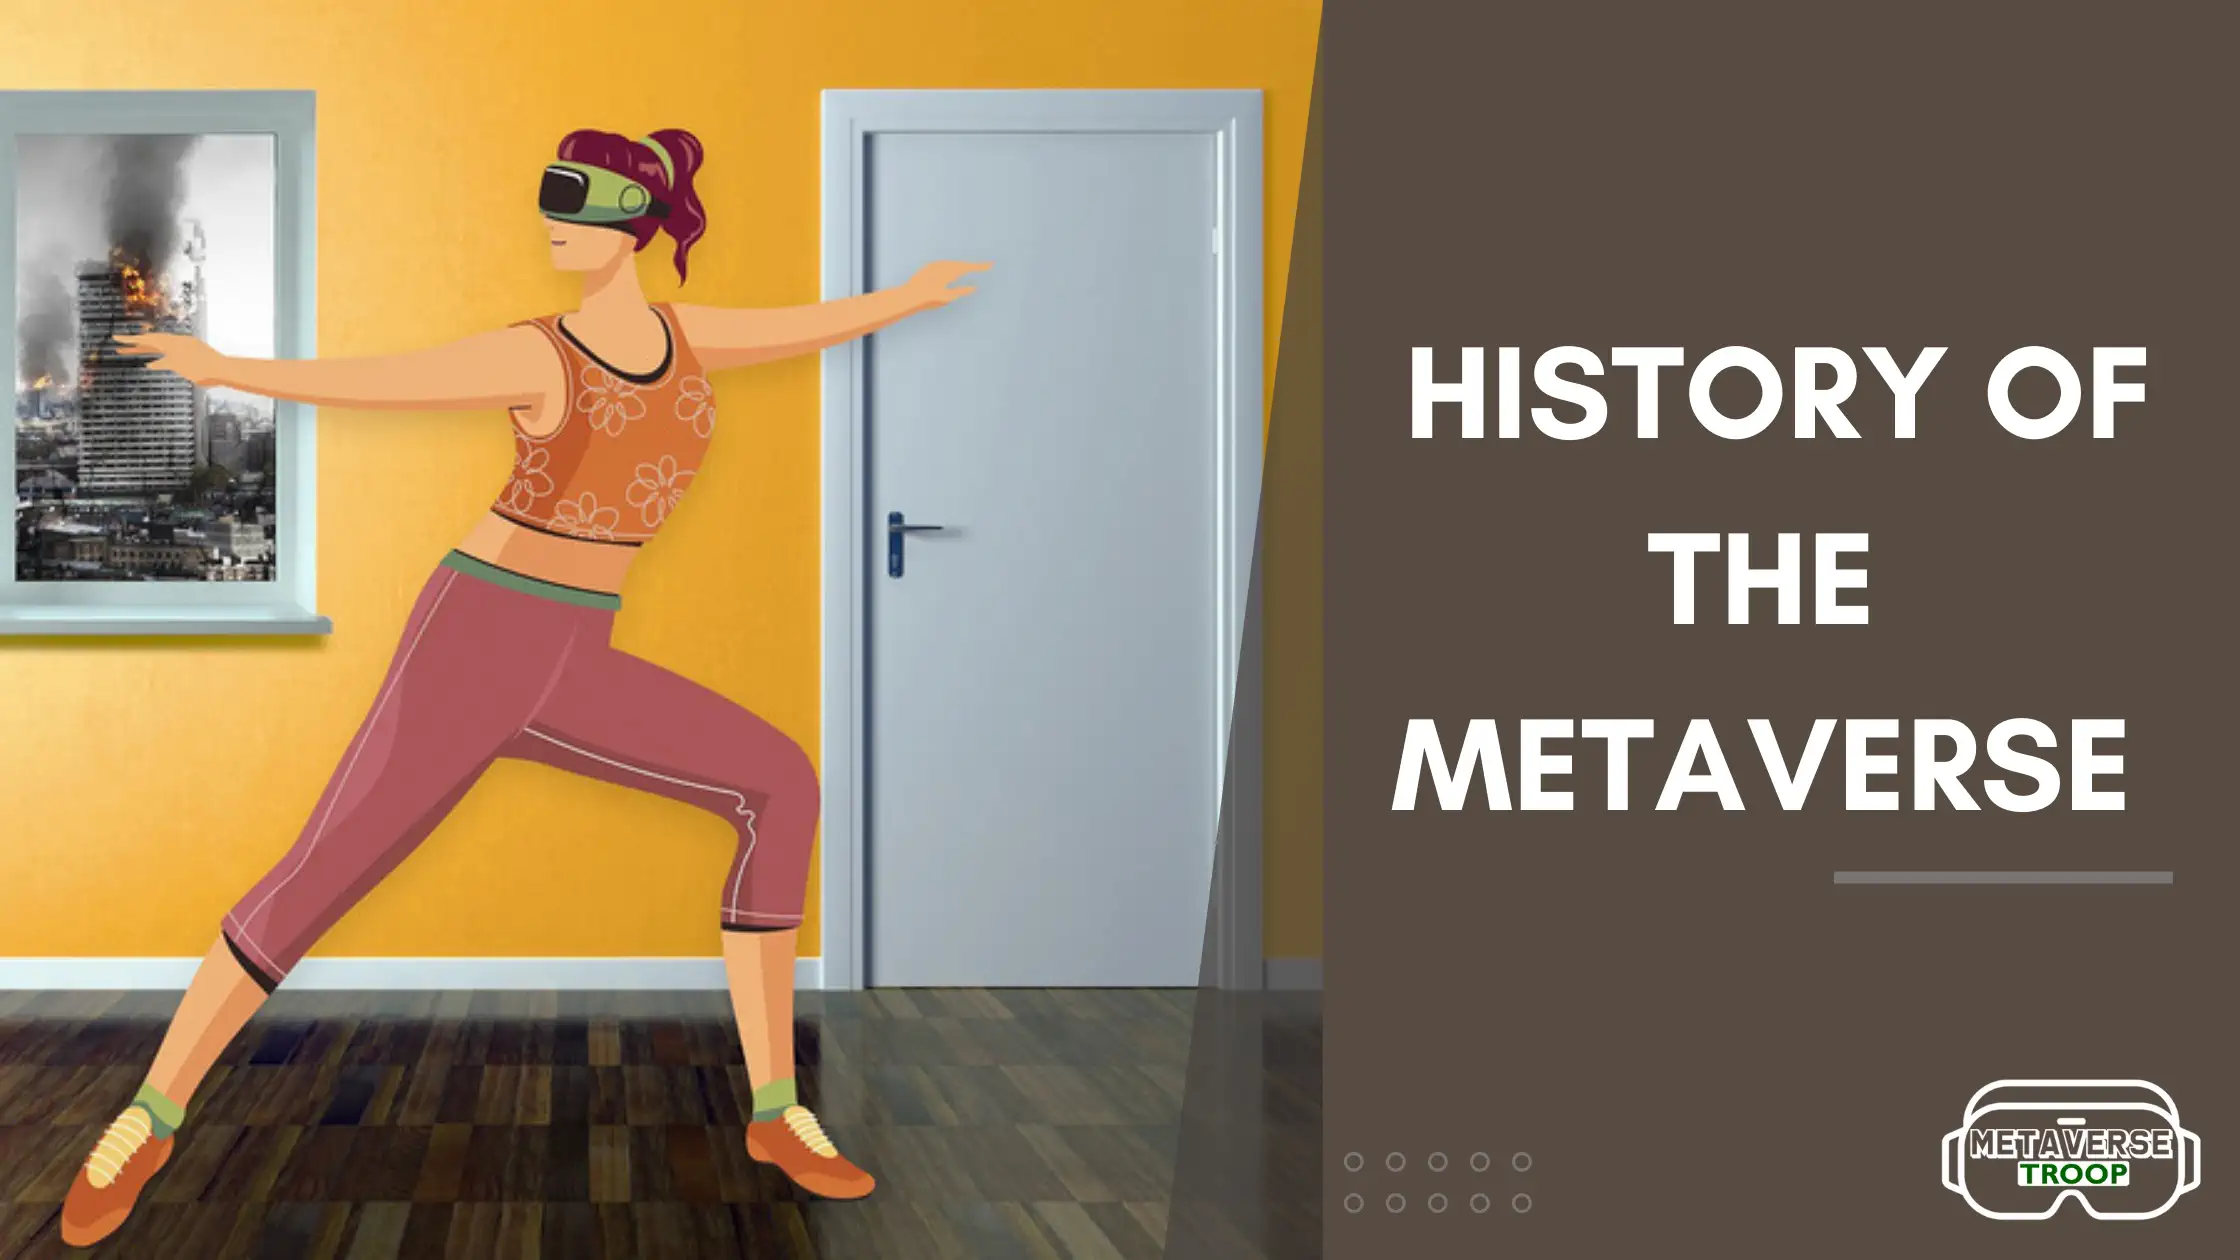 History of the metaverse